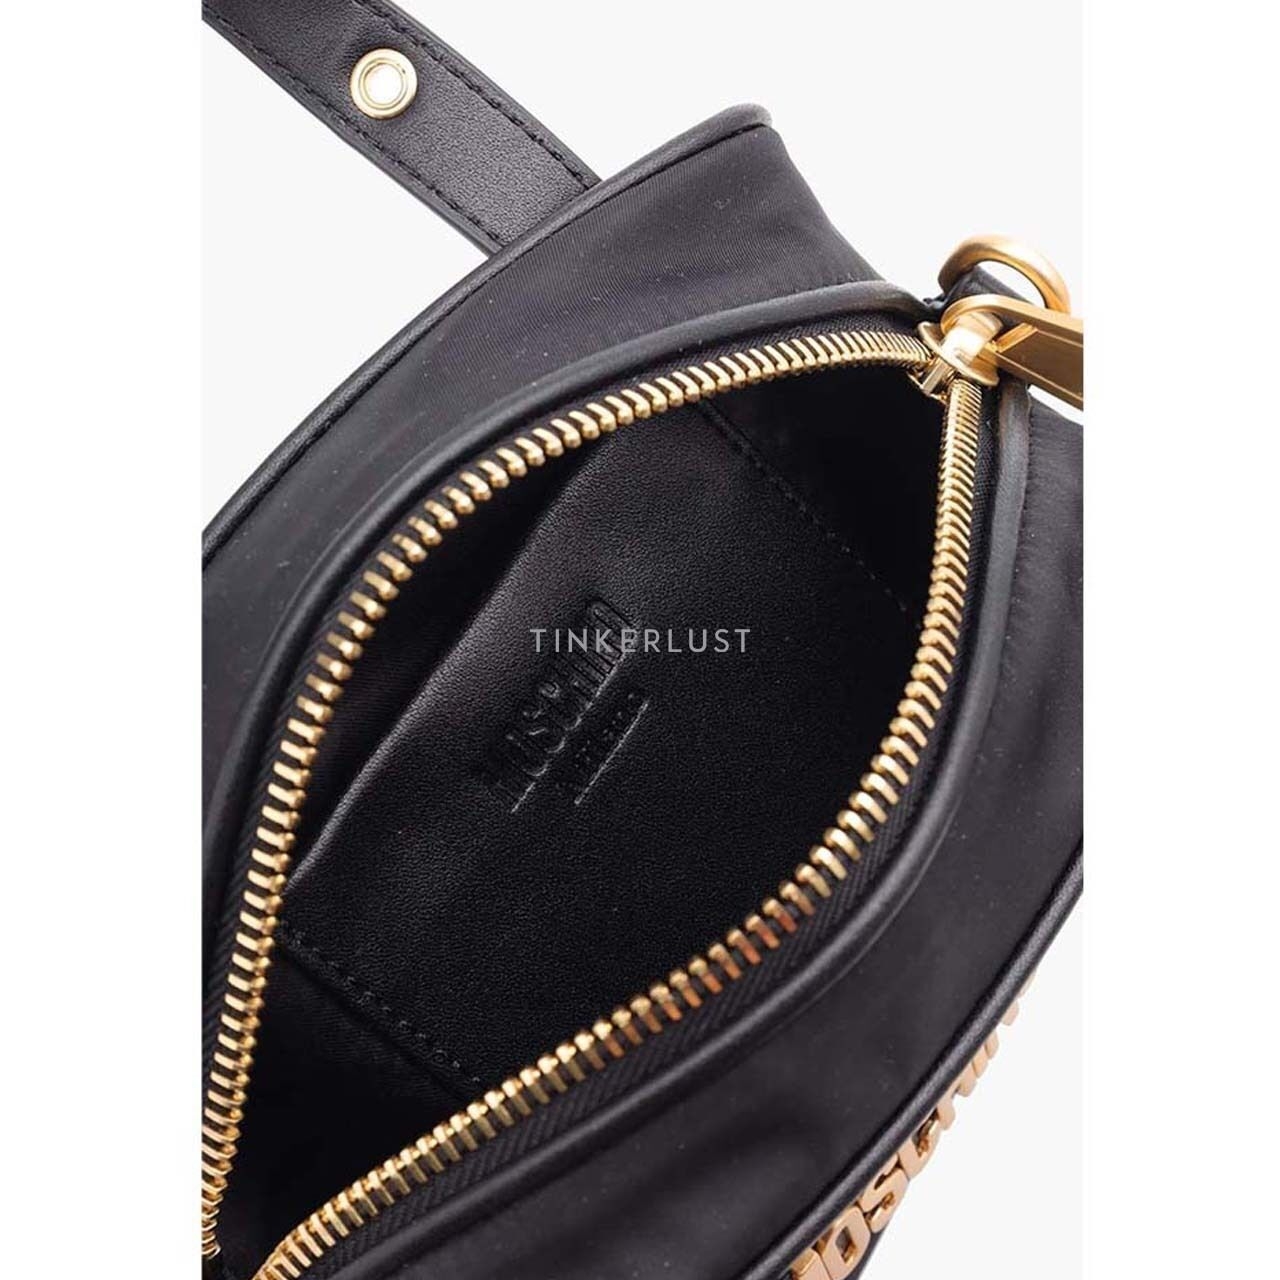 Moschino Logo Top Handle in Black GHW with Metal Detail Satchel